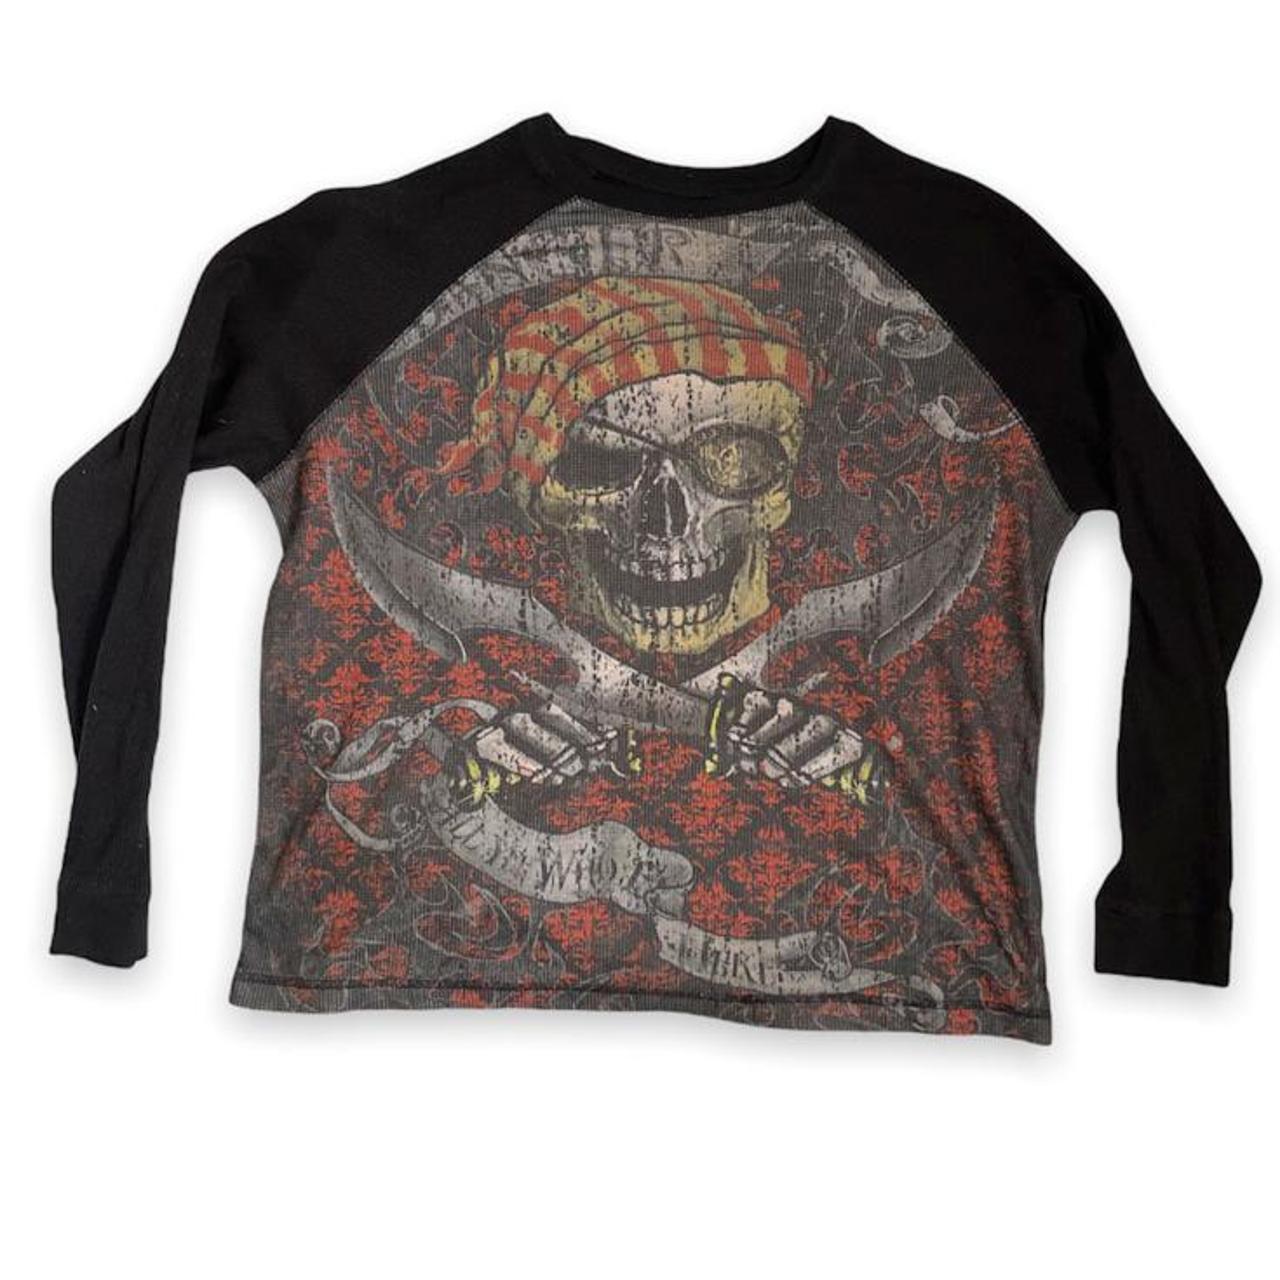 Product Image 4 - 🎱SKULLY oversized pirate thermal🎱
Such a